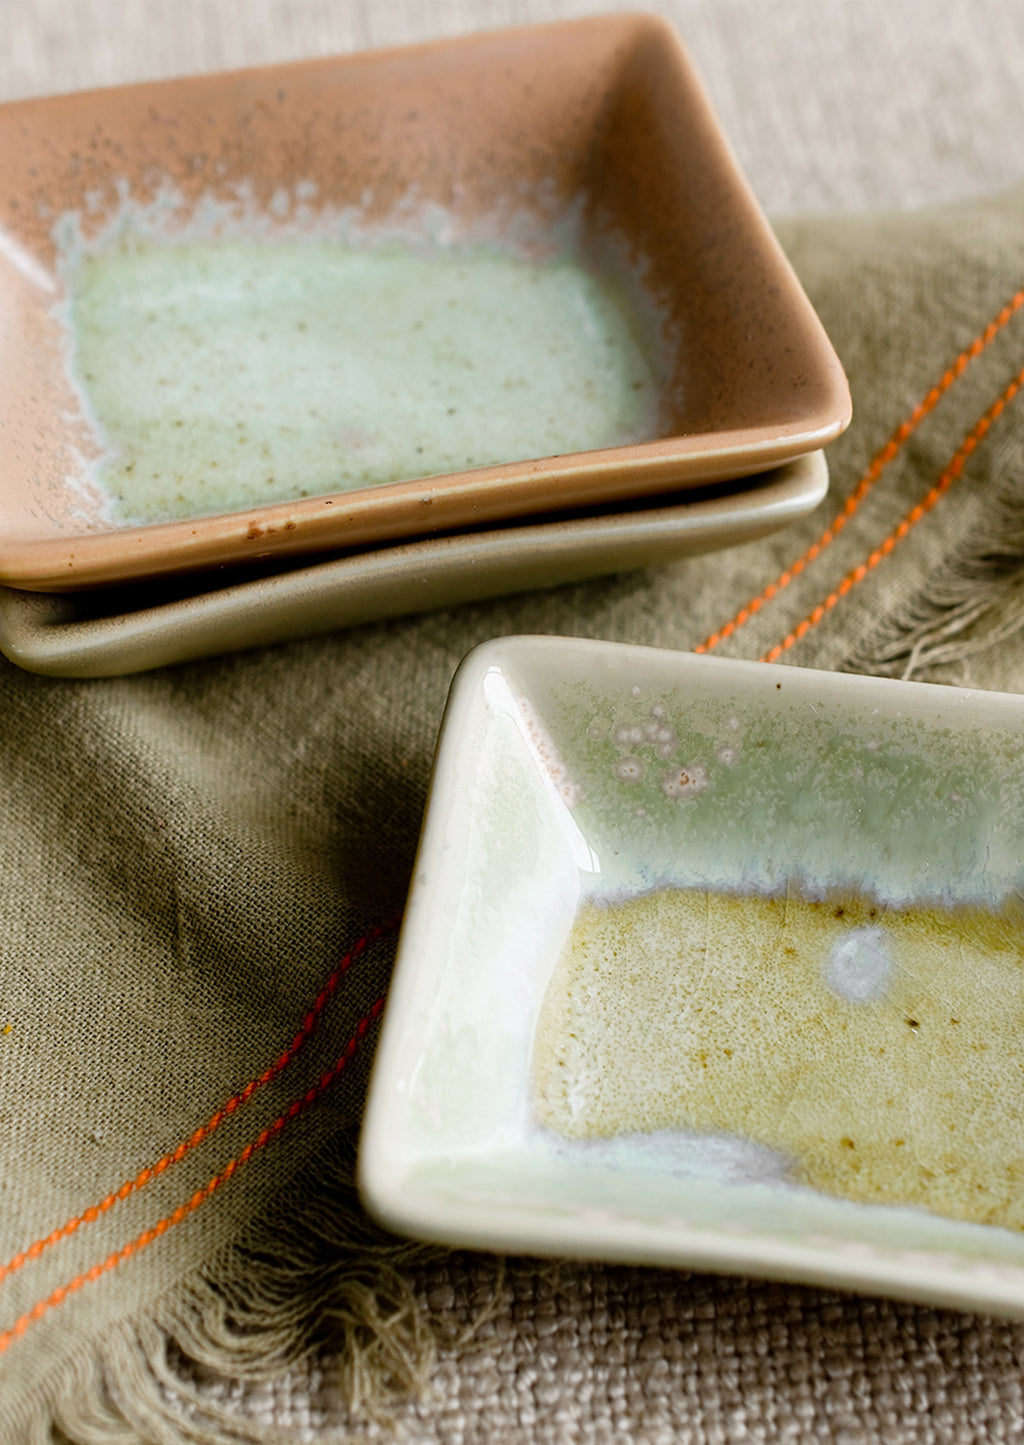 2: Rectangular ceramic sauce dishes in turquoise, green and brown varied glazes.